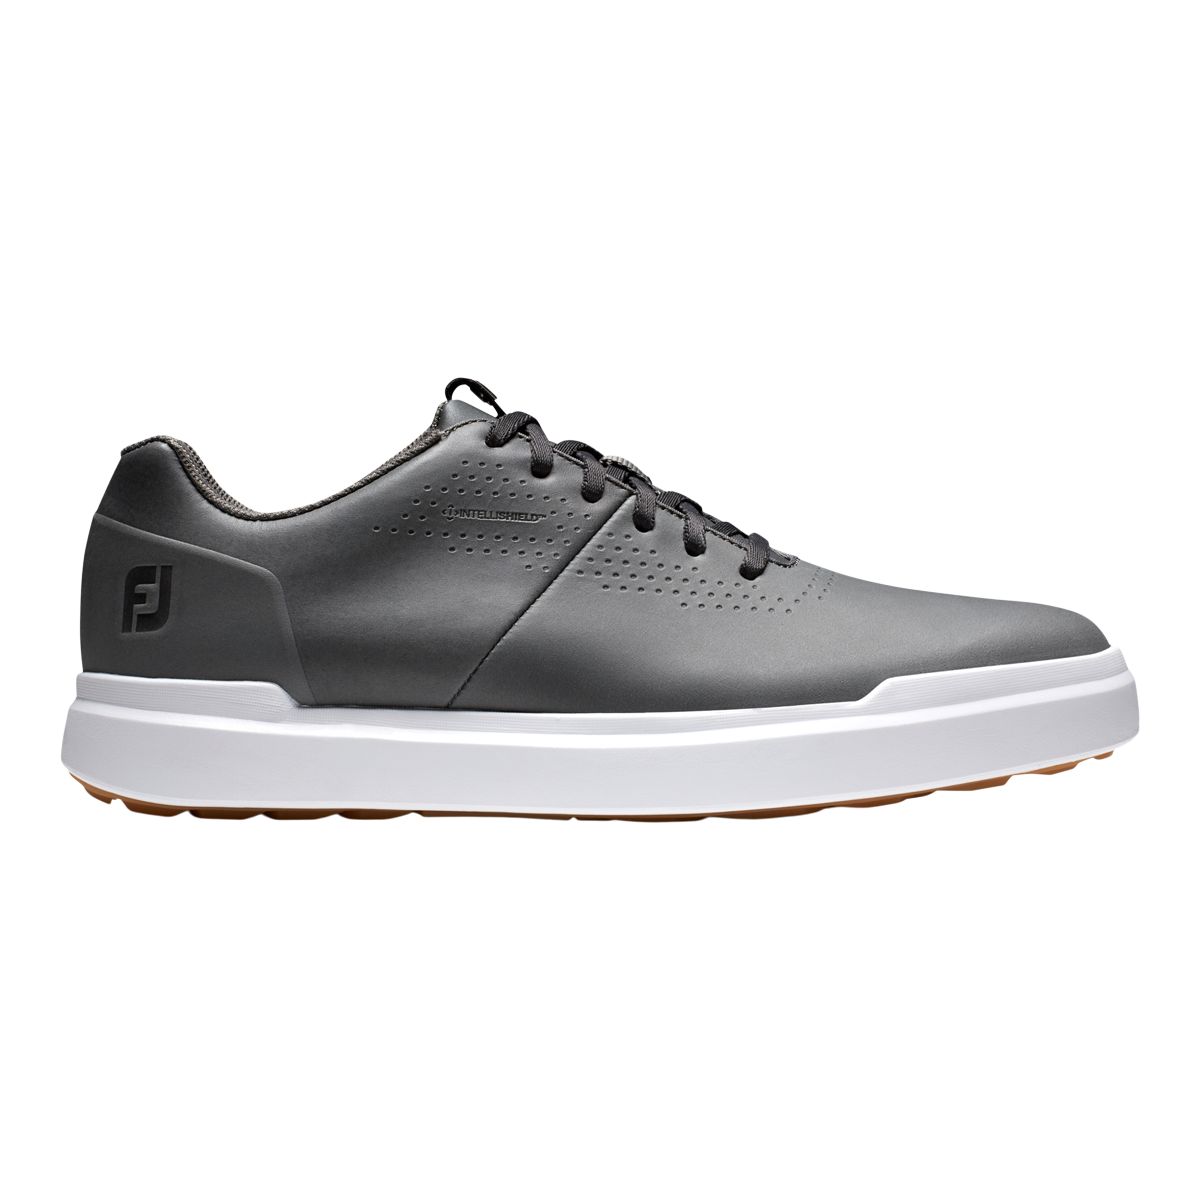 Image of Footjoy Men's Contour Casual Spikeless Laced Golf Shoes